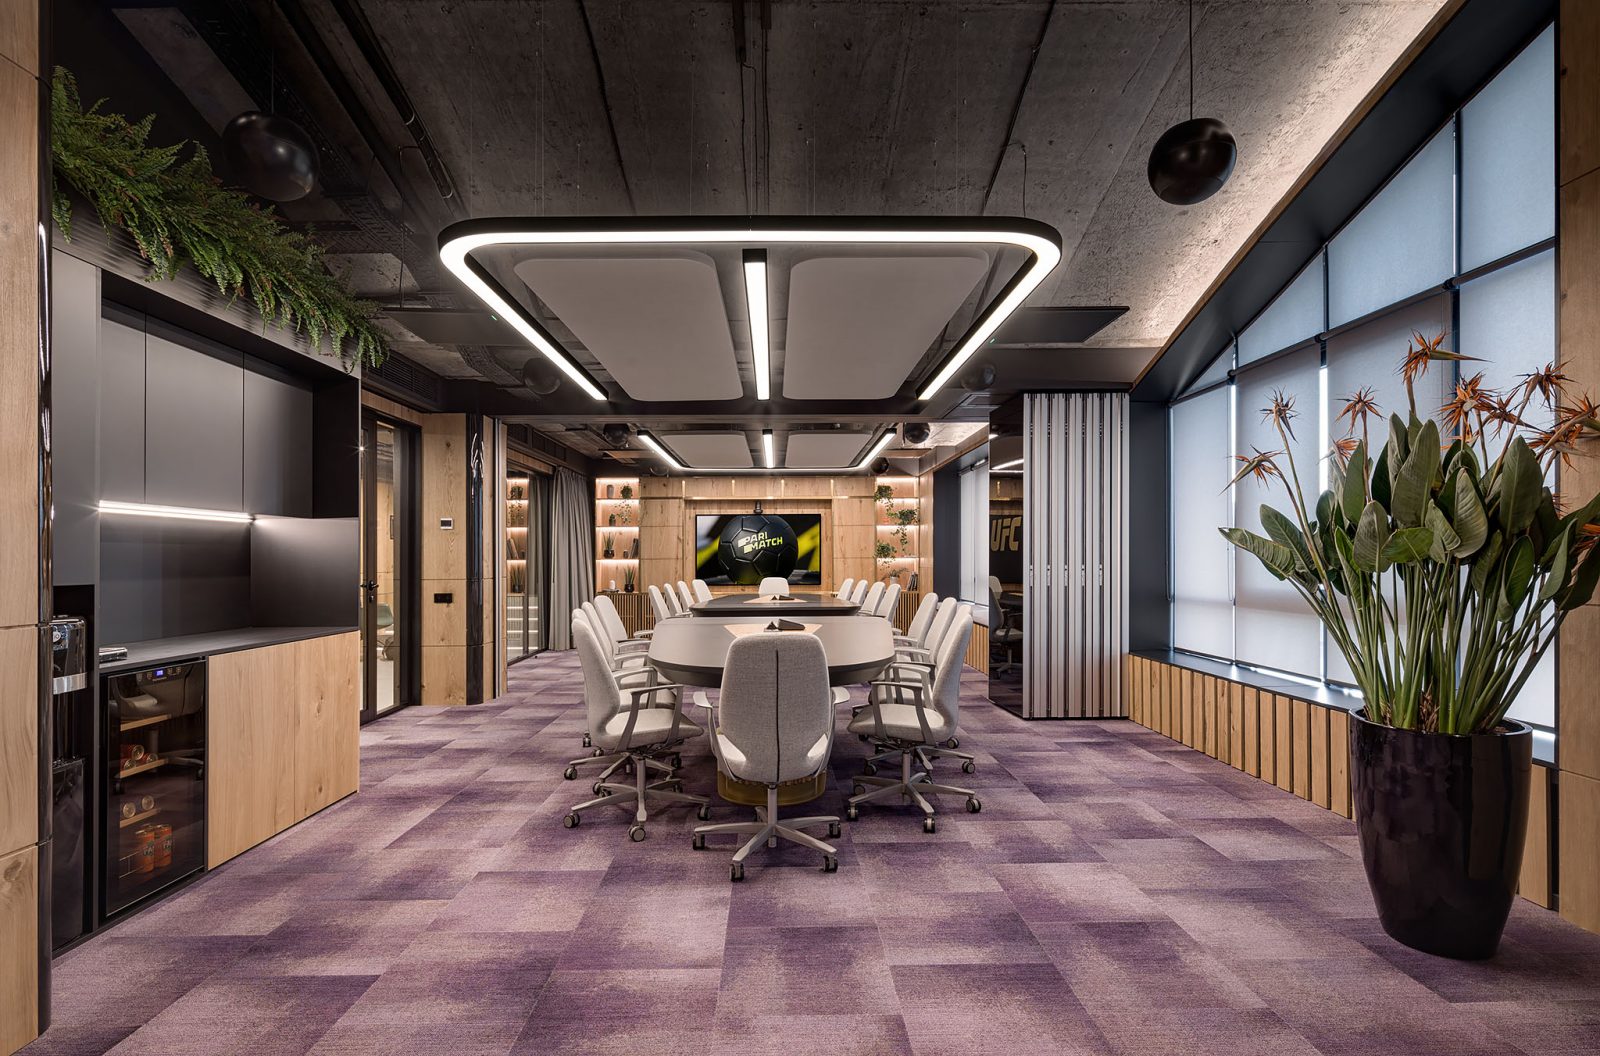 Interior design of conference rooms 1